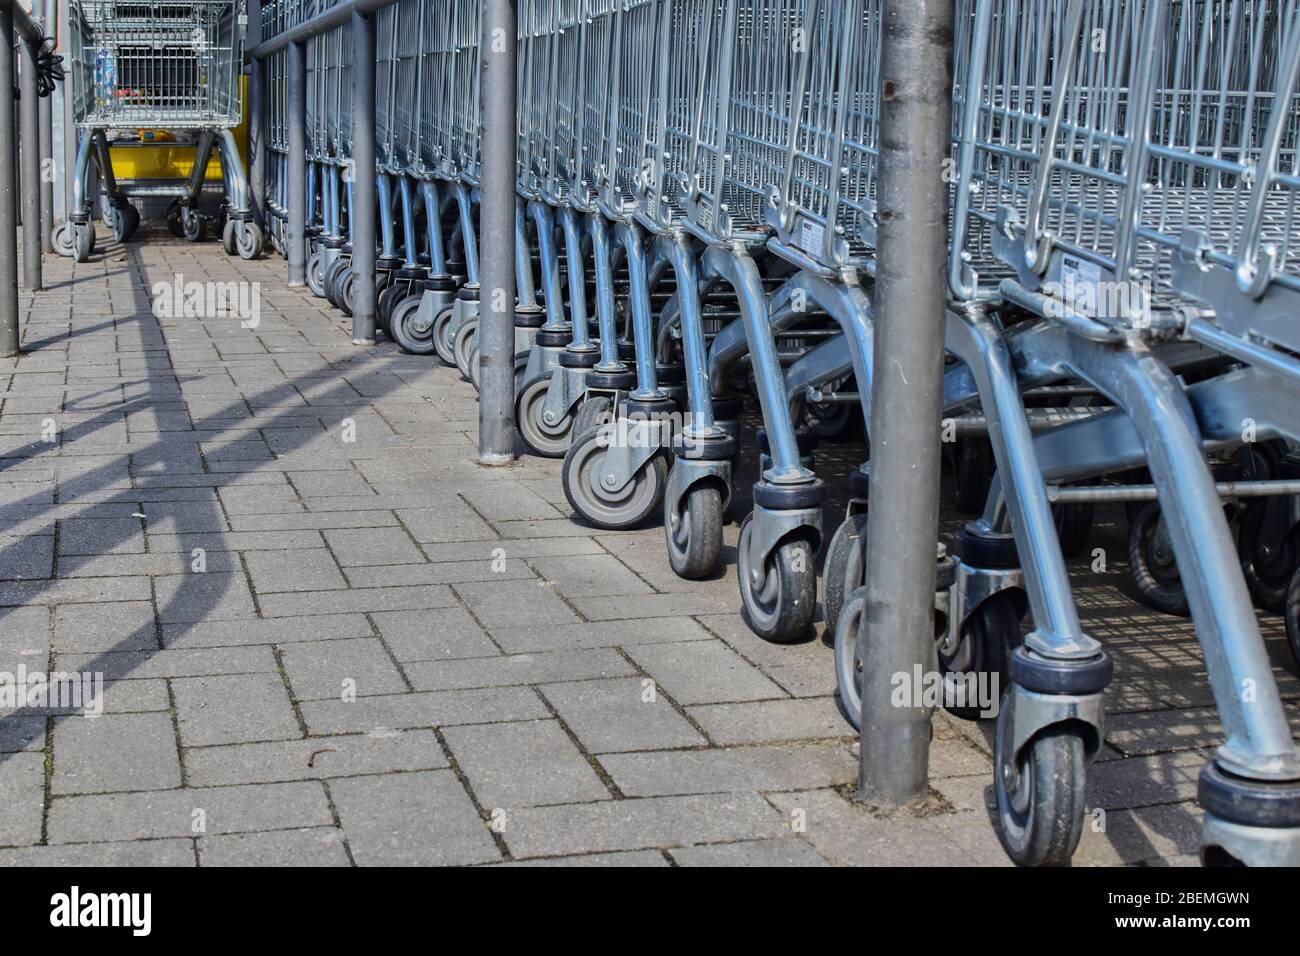 Berlin, Germany - April 2, 2018: View along a row of shopping carts at the height of the shopping carts. Stock Photo